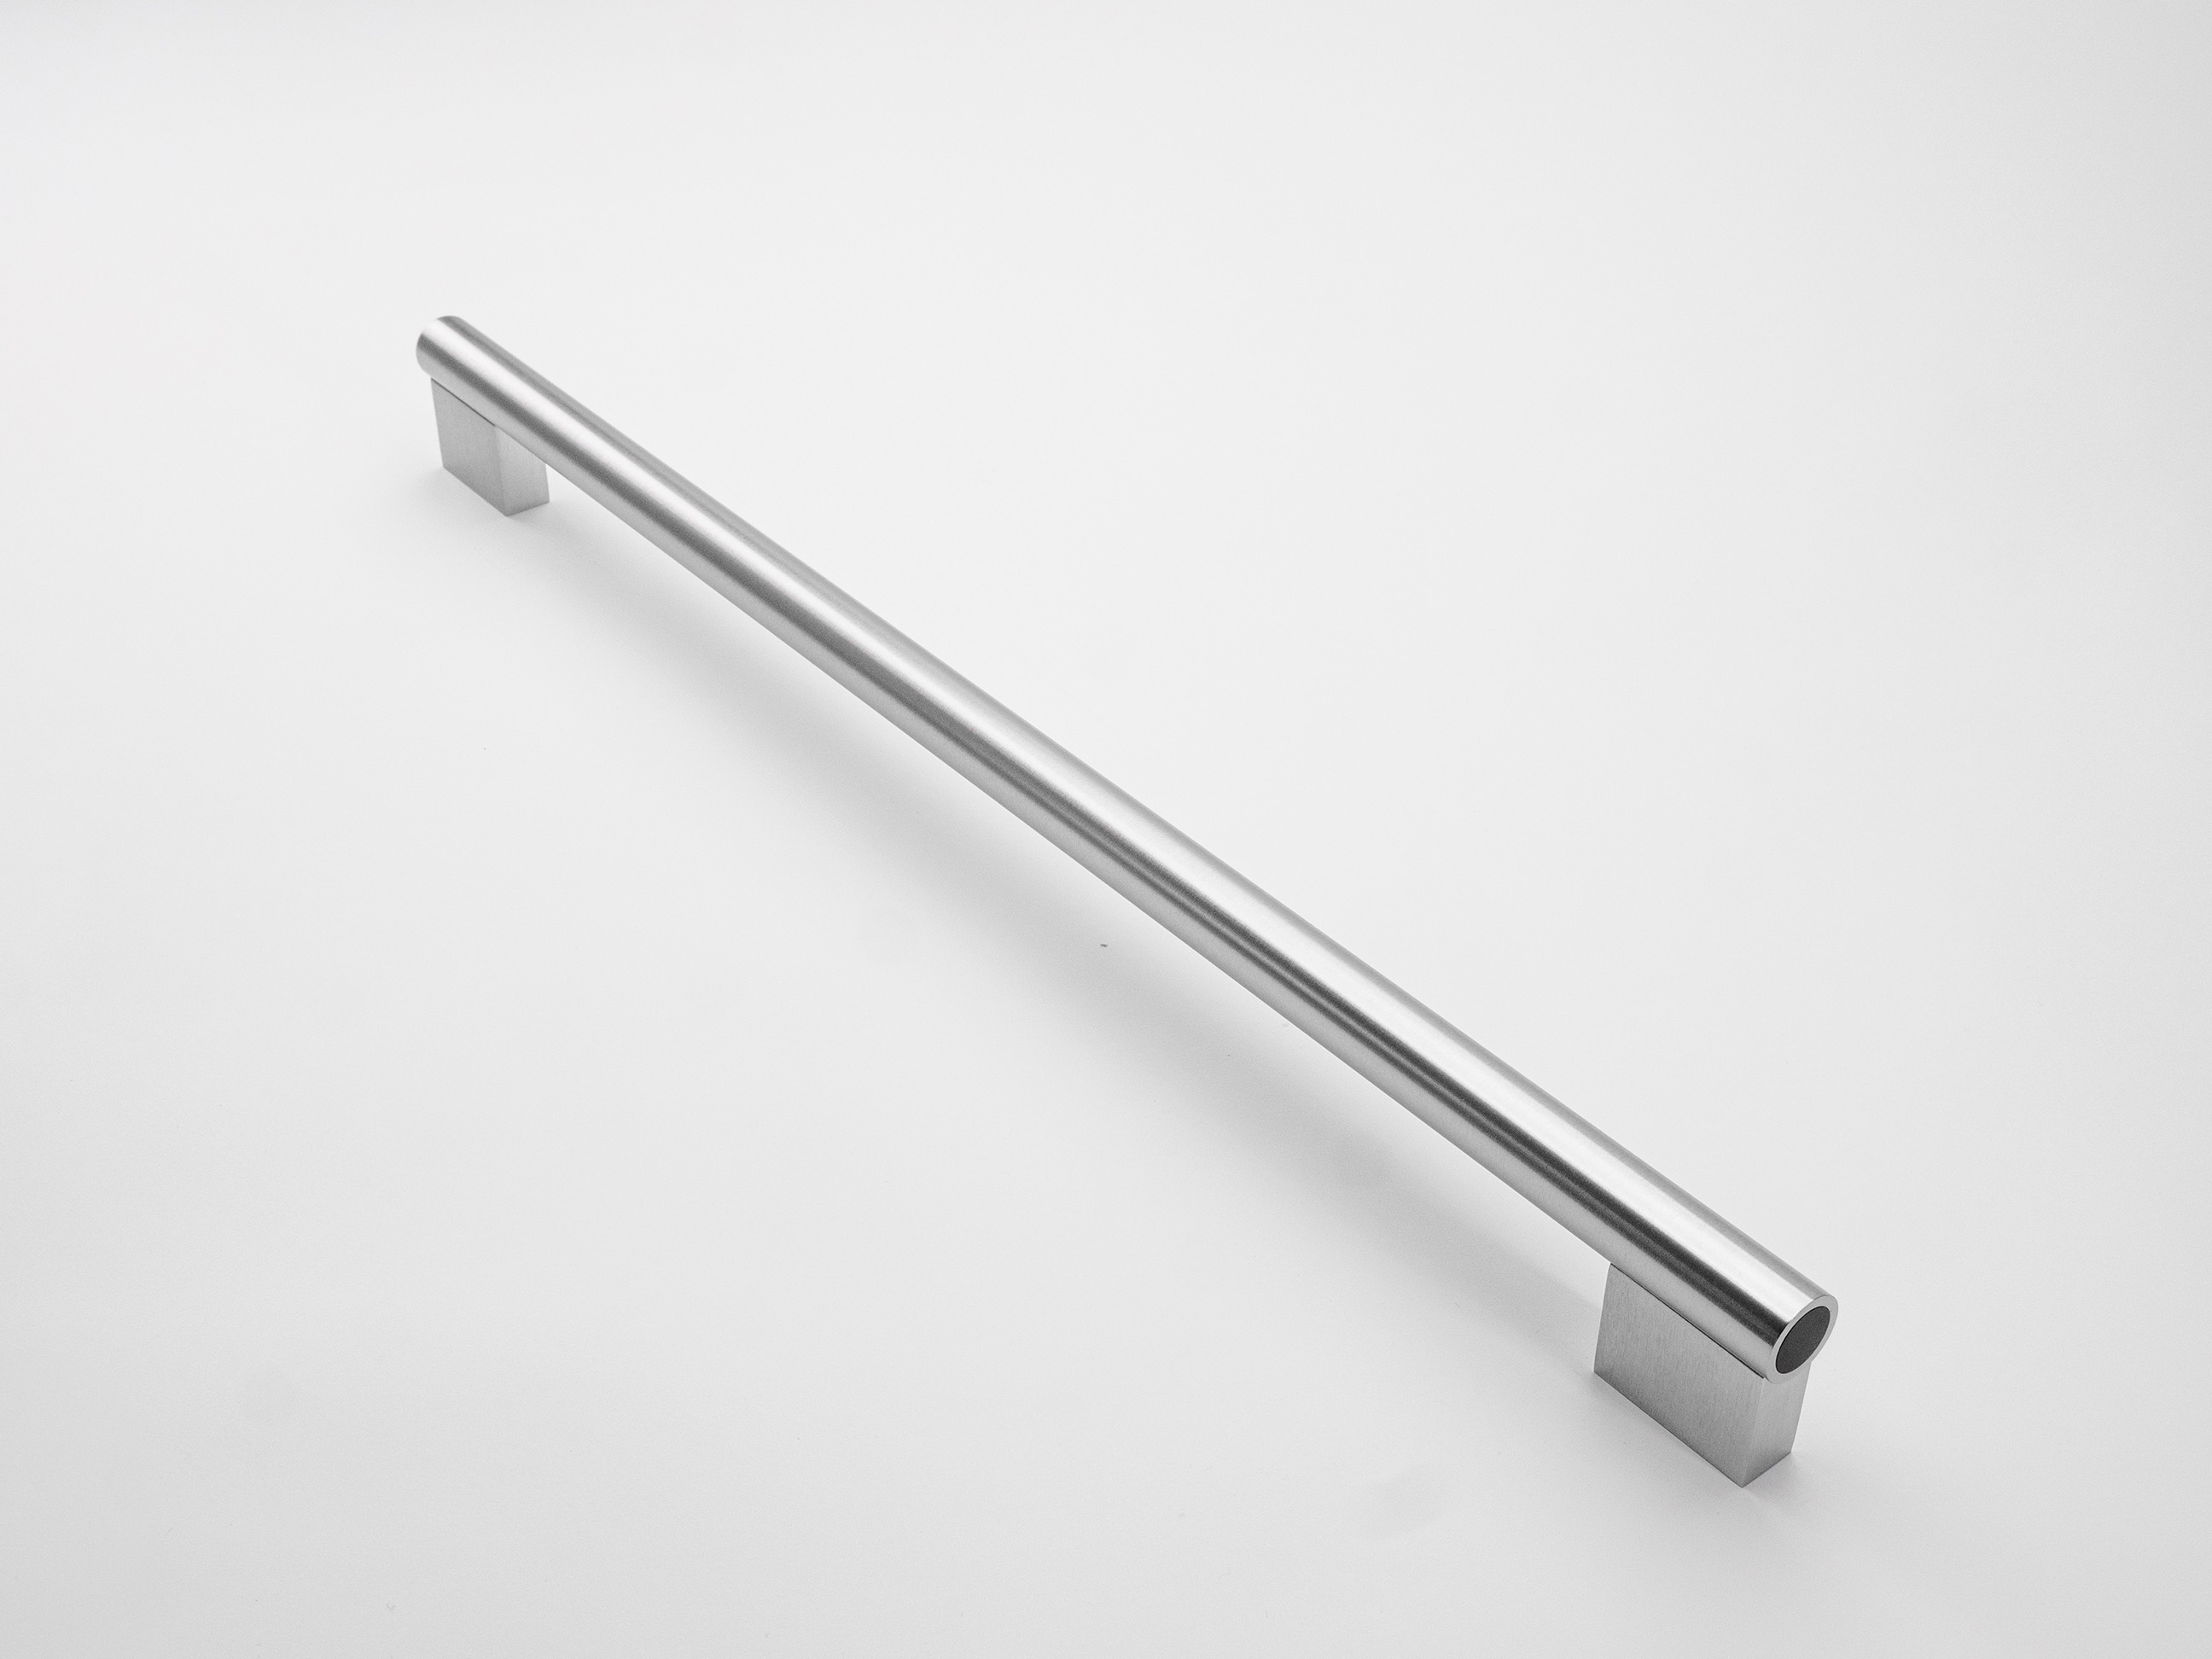 5-piece oven handle - with extruded tubular and brushed Anodized steel-like spacers in Derlin caps